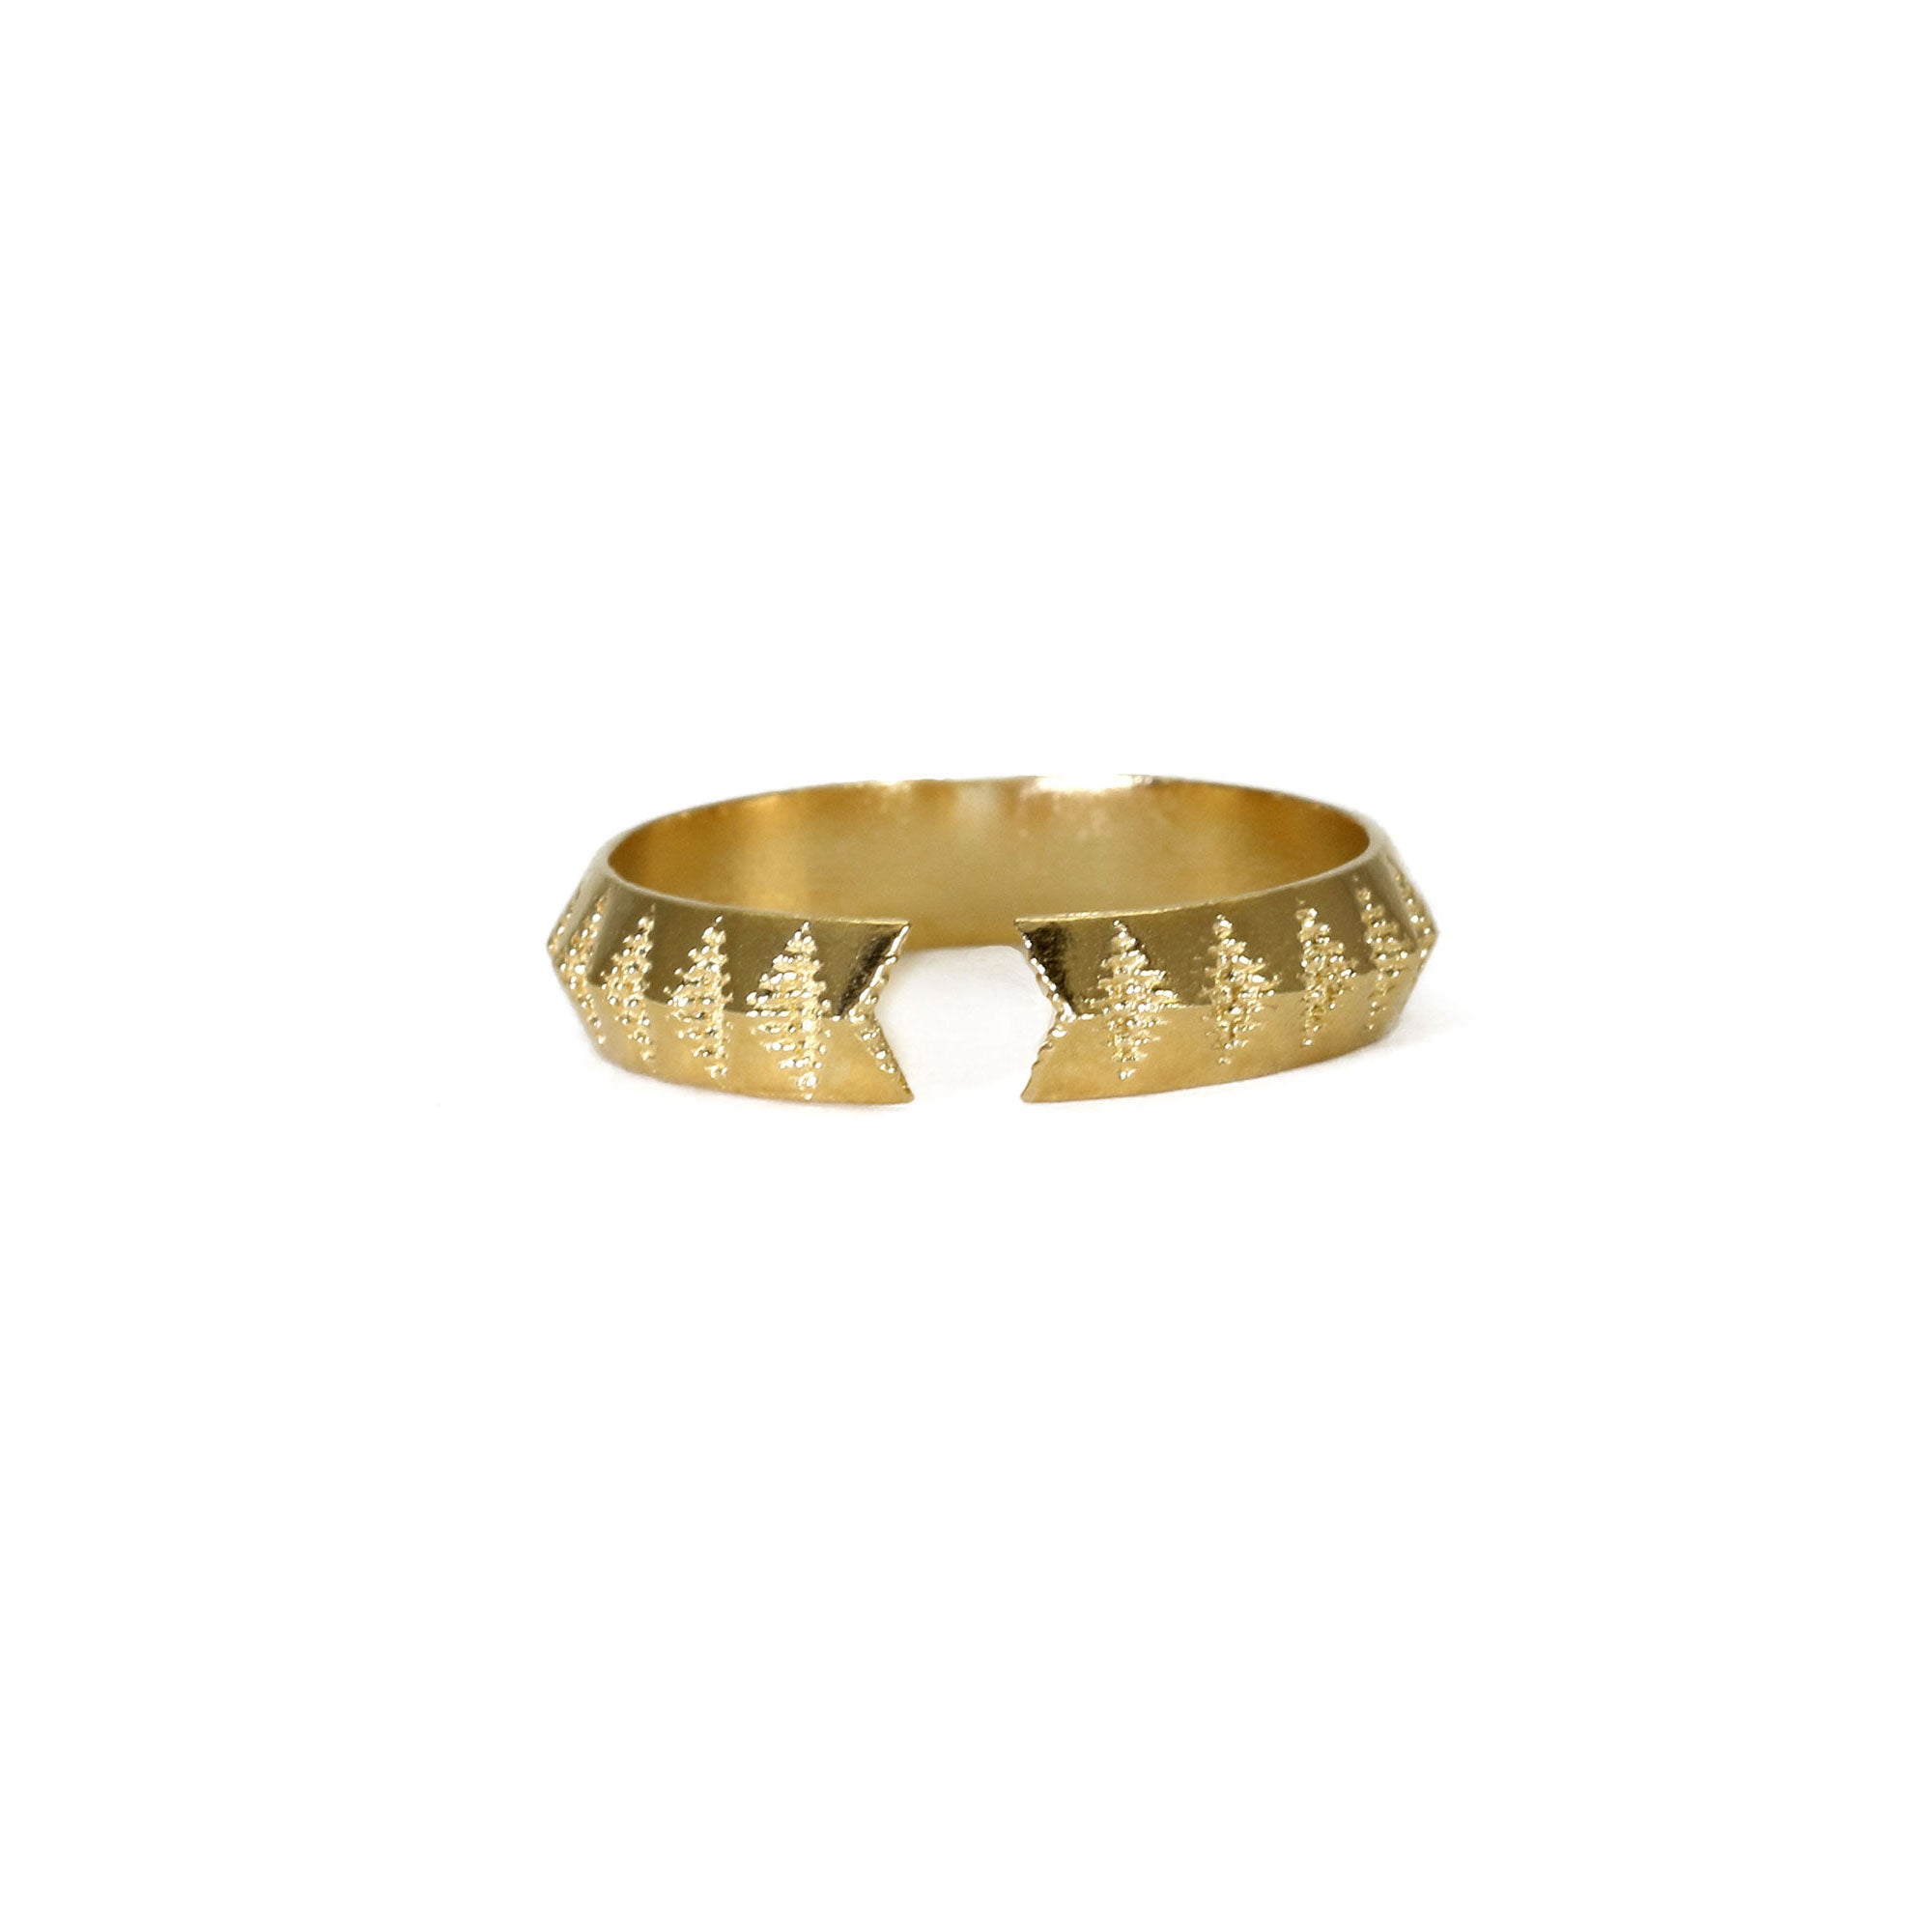 Chasm Diamond Pattern Ring in yellow gold